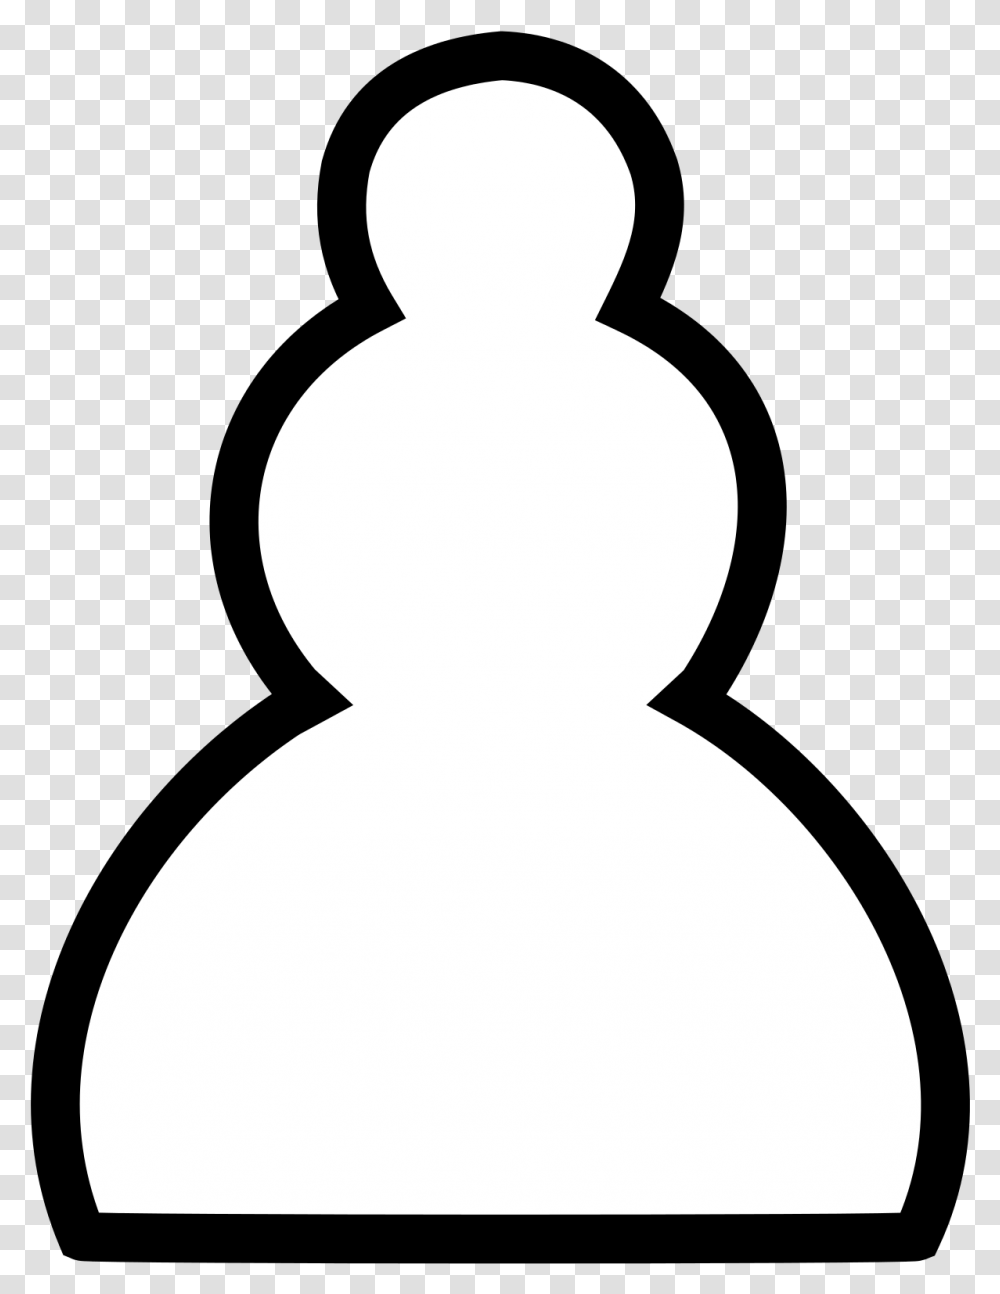 Gold Outline Pot Of Gold Outline Chess White Pawn Chess White Pawn Clipart, Nature, Outdoors, Snow, Snowman Transparent Png